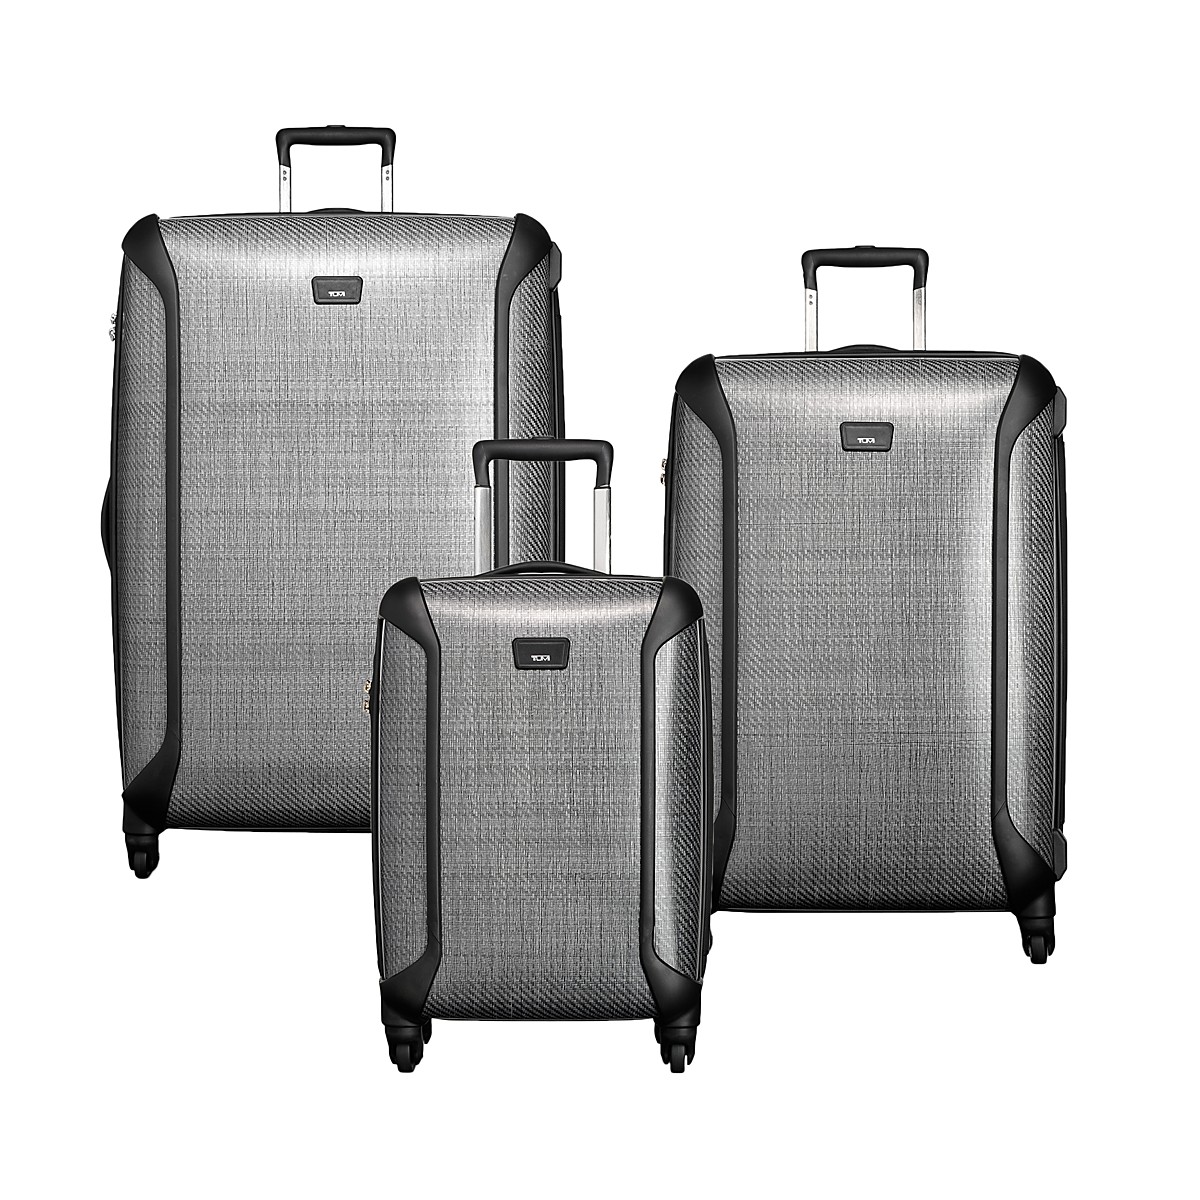 Up to 42% Off Tumi Luggage On Sale @ Gilt